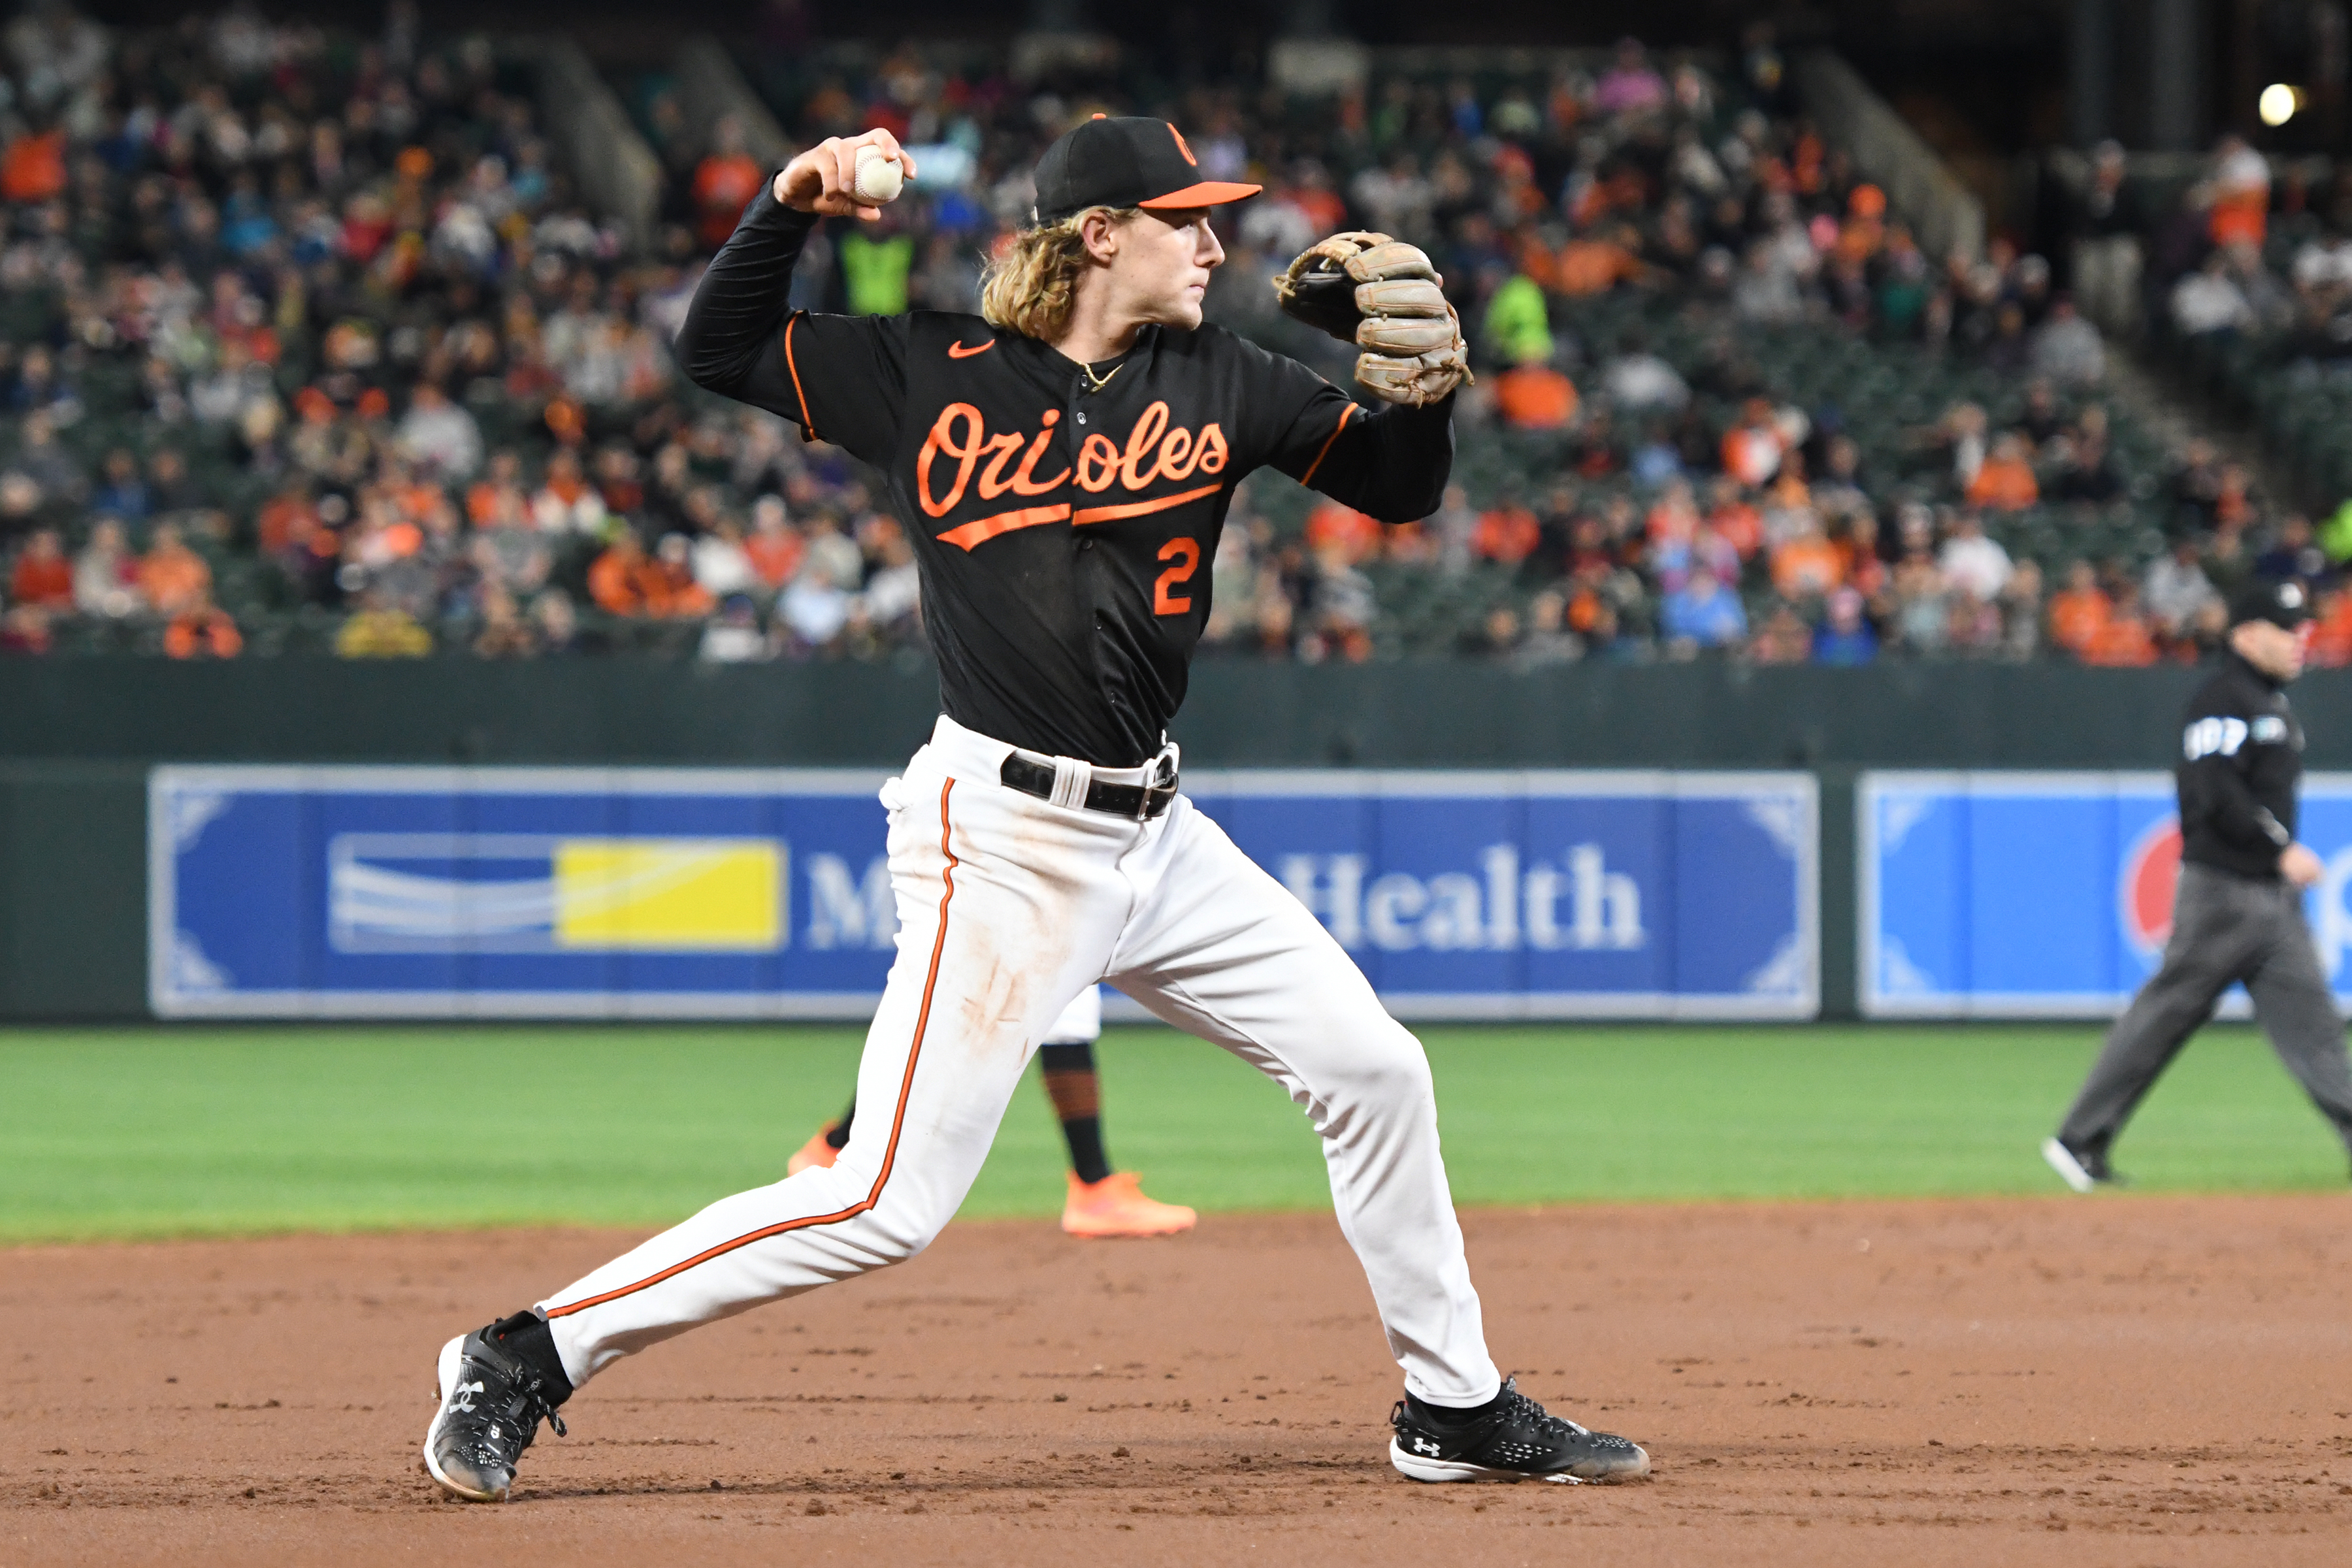 Gunnar Henderson of the Baltimore Orioles fields a ground ball during a baseball game against the Houston Astros at Oriole Park at Camden Yards on September 23, 2022 in Baltimore, Maryland.